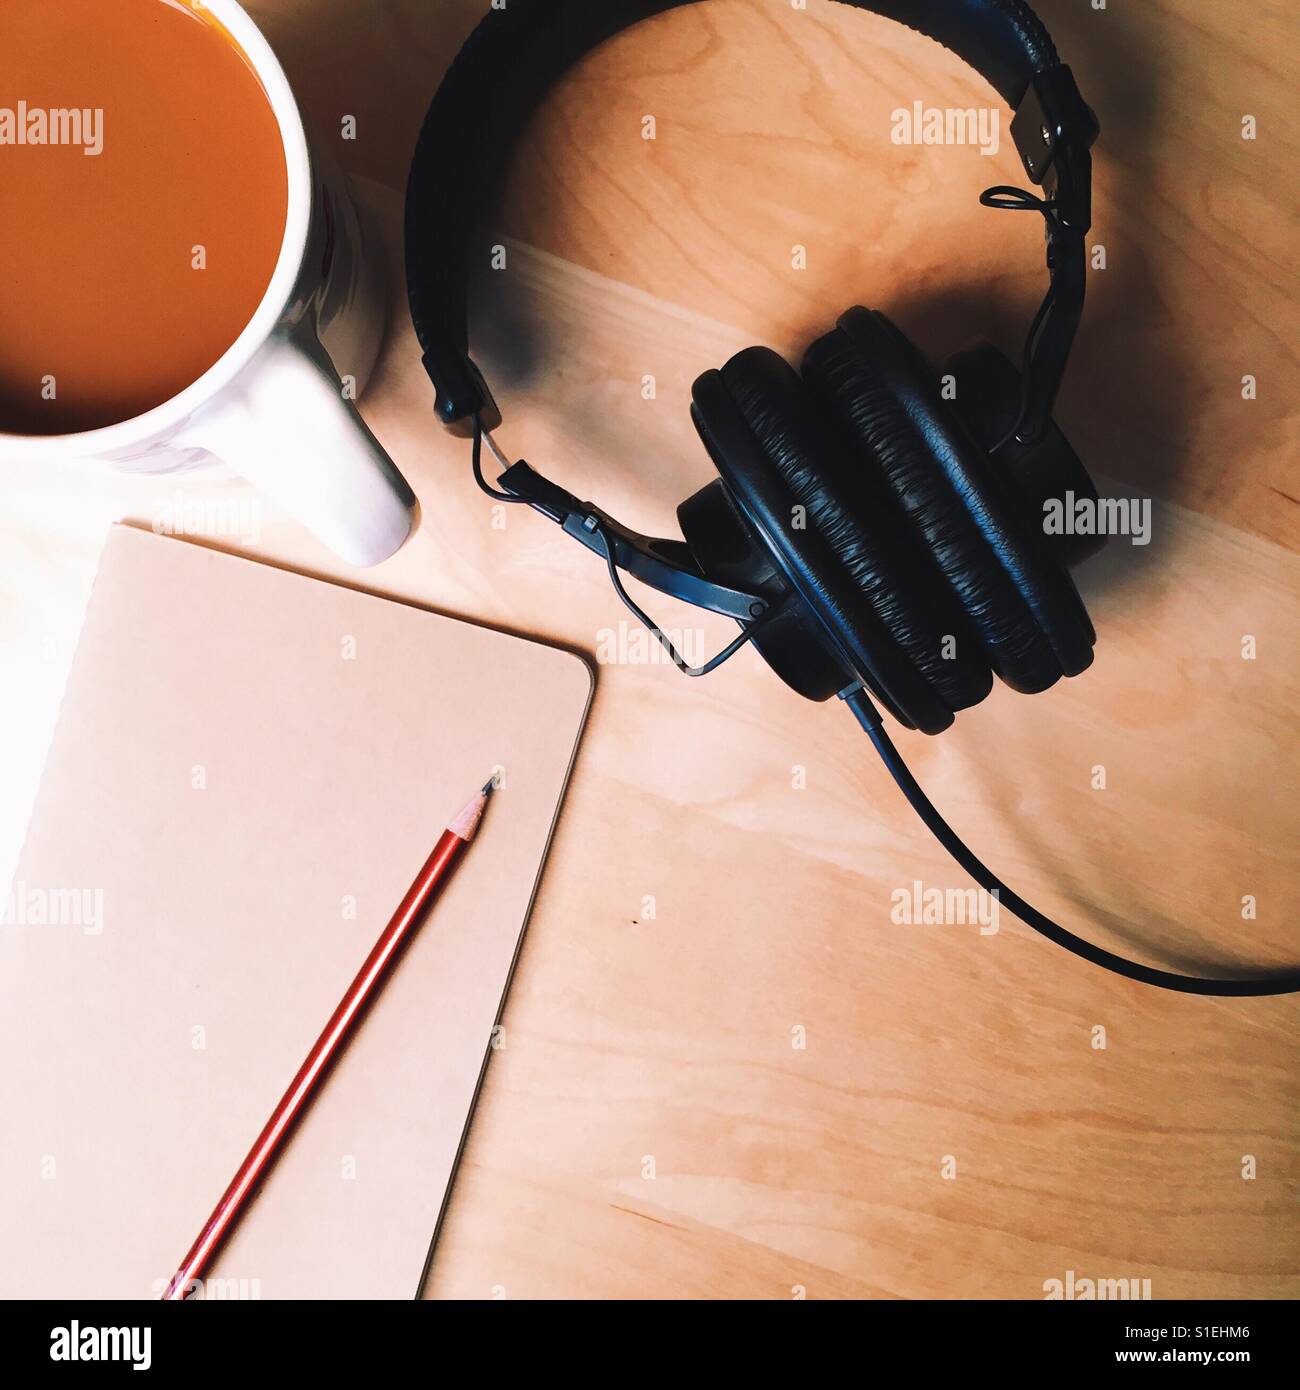 An overhead shot of a workspace. Stock Photo